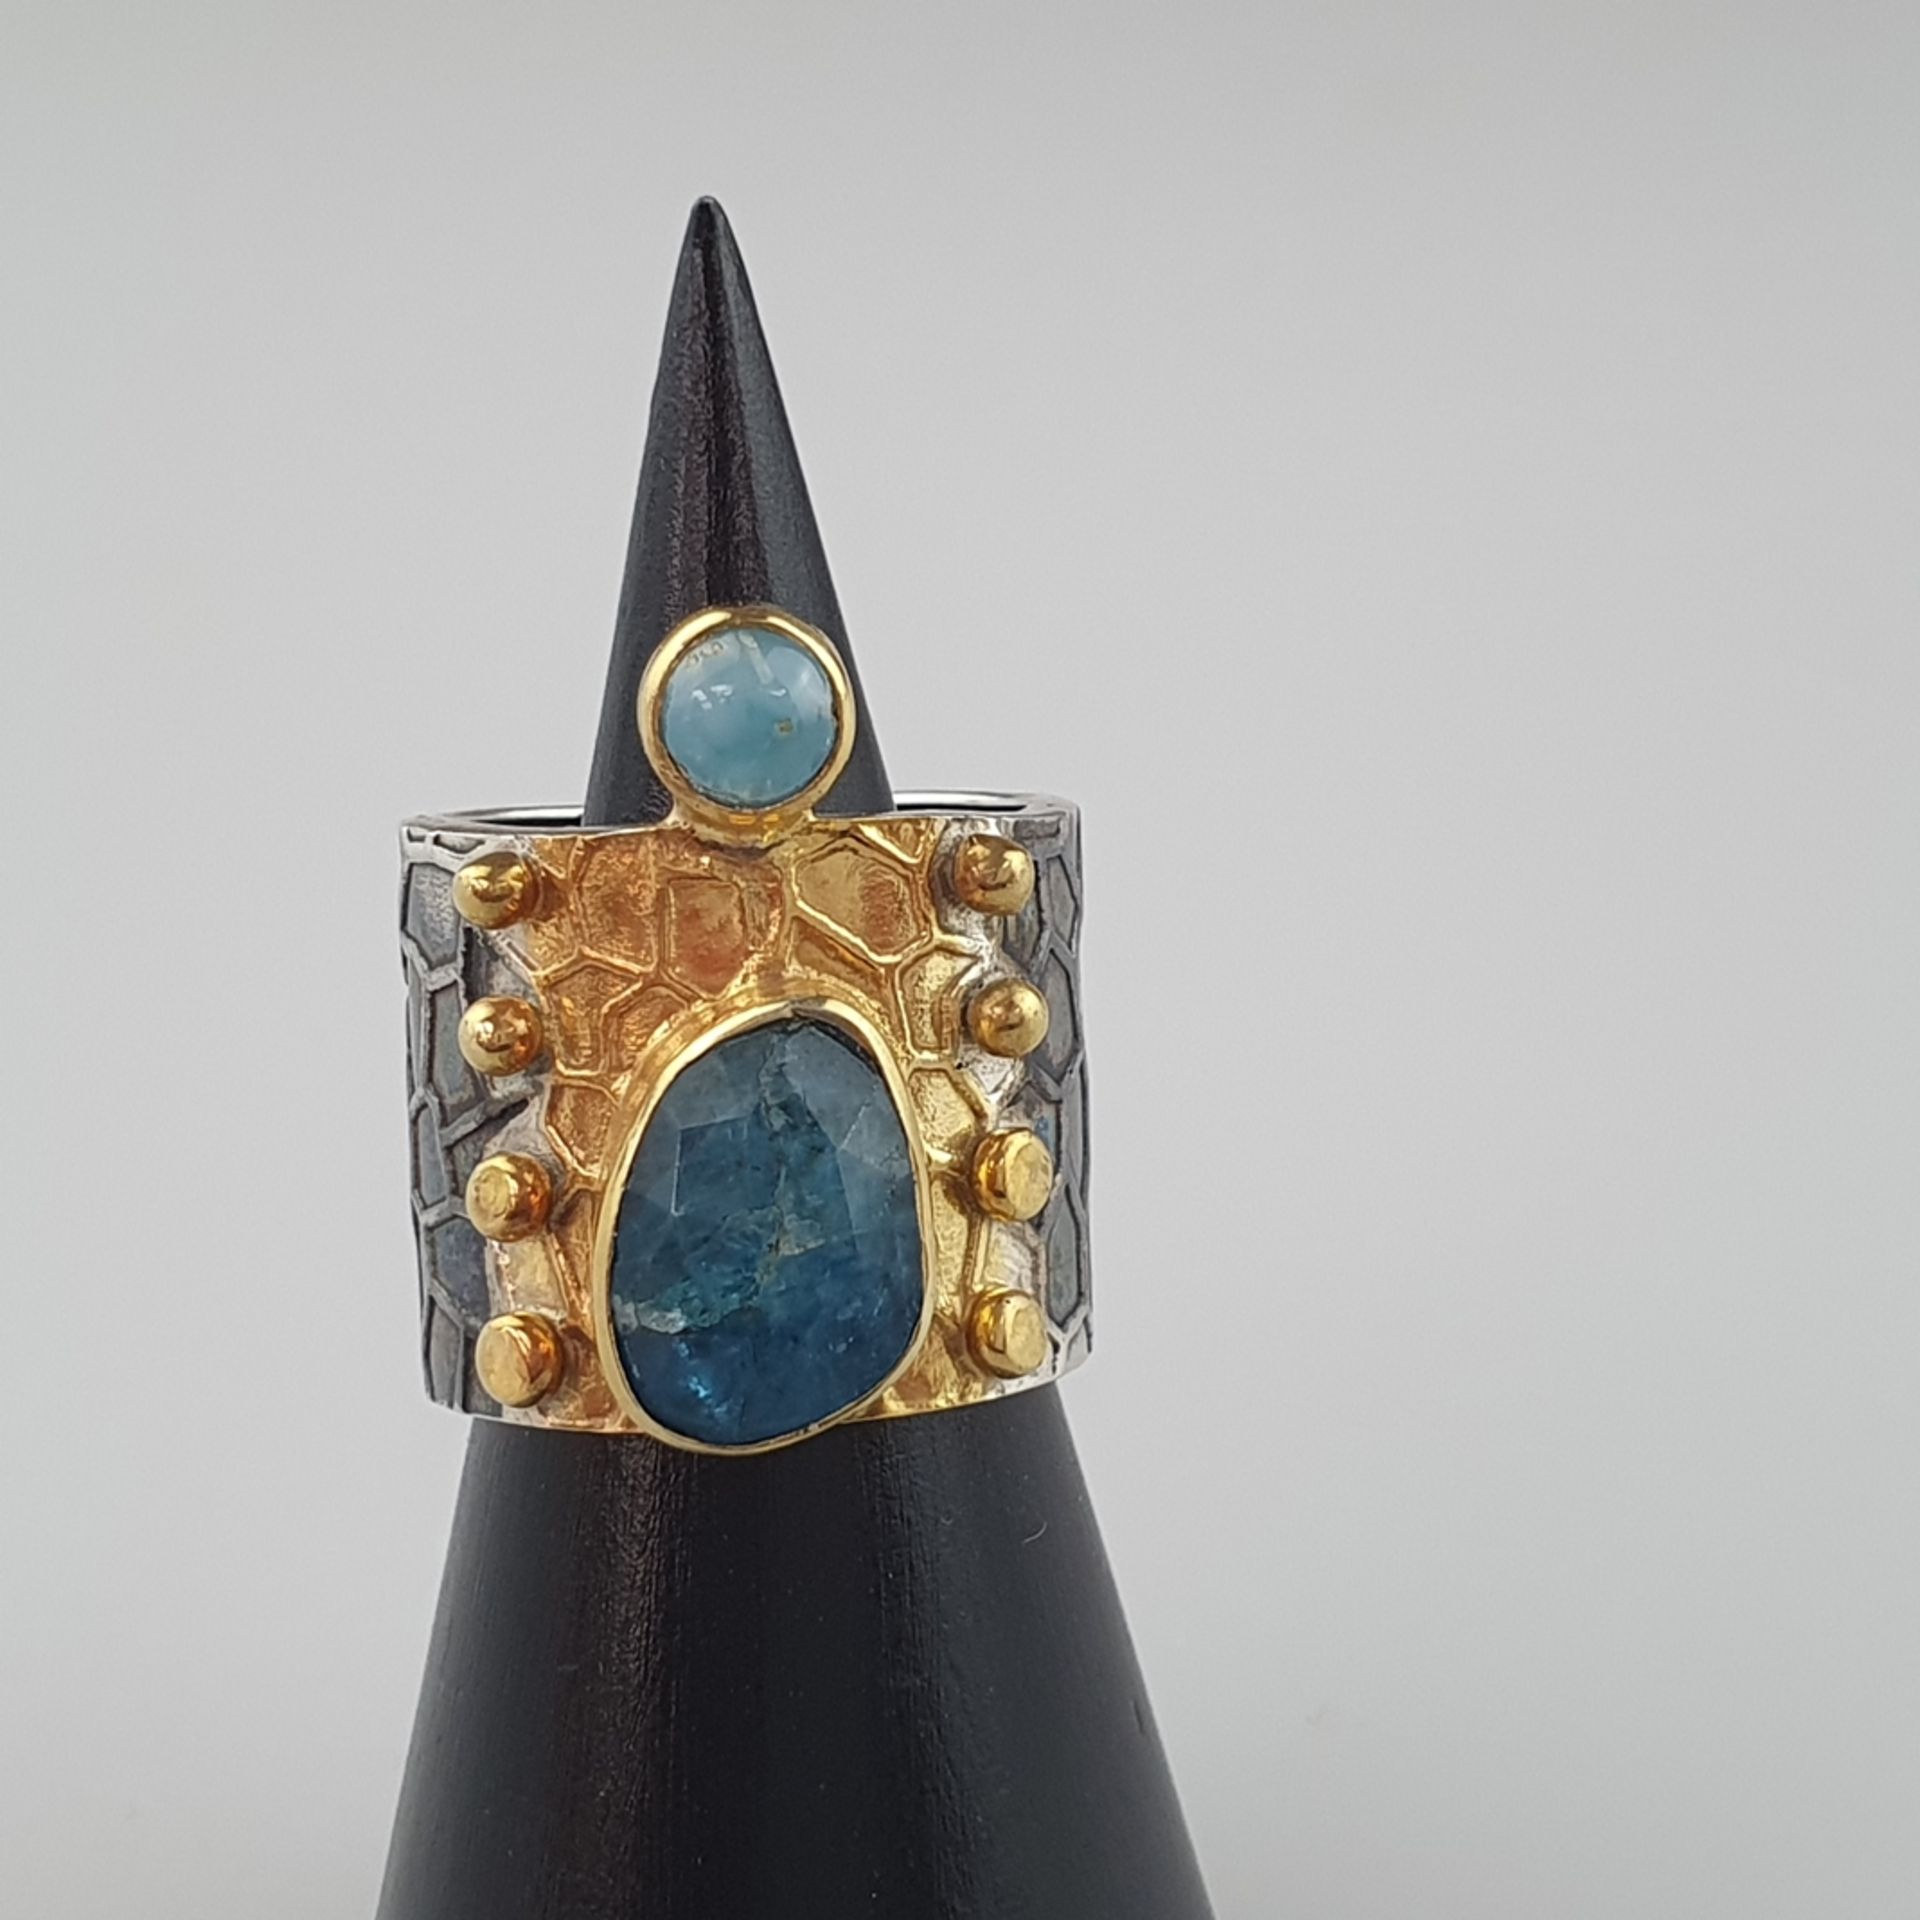 Damenring - 925er Silber, breite Ringschiene, goldfarbe | 925 Silver Ring with Kyanite and Sapphire - Image 6 of 6